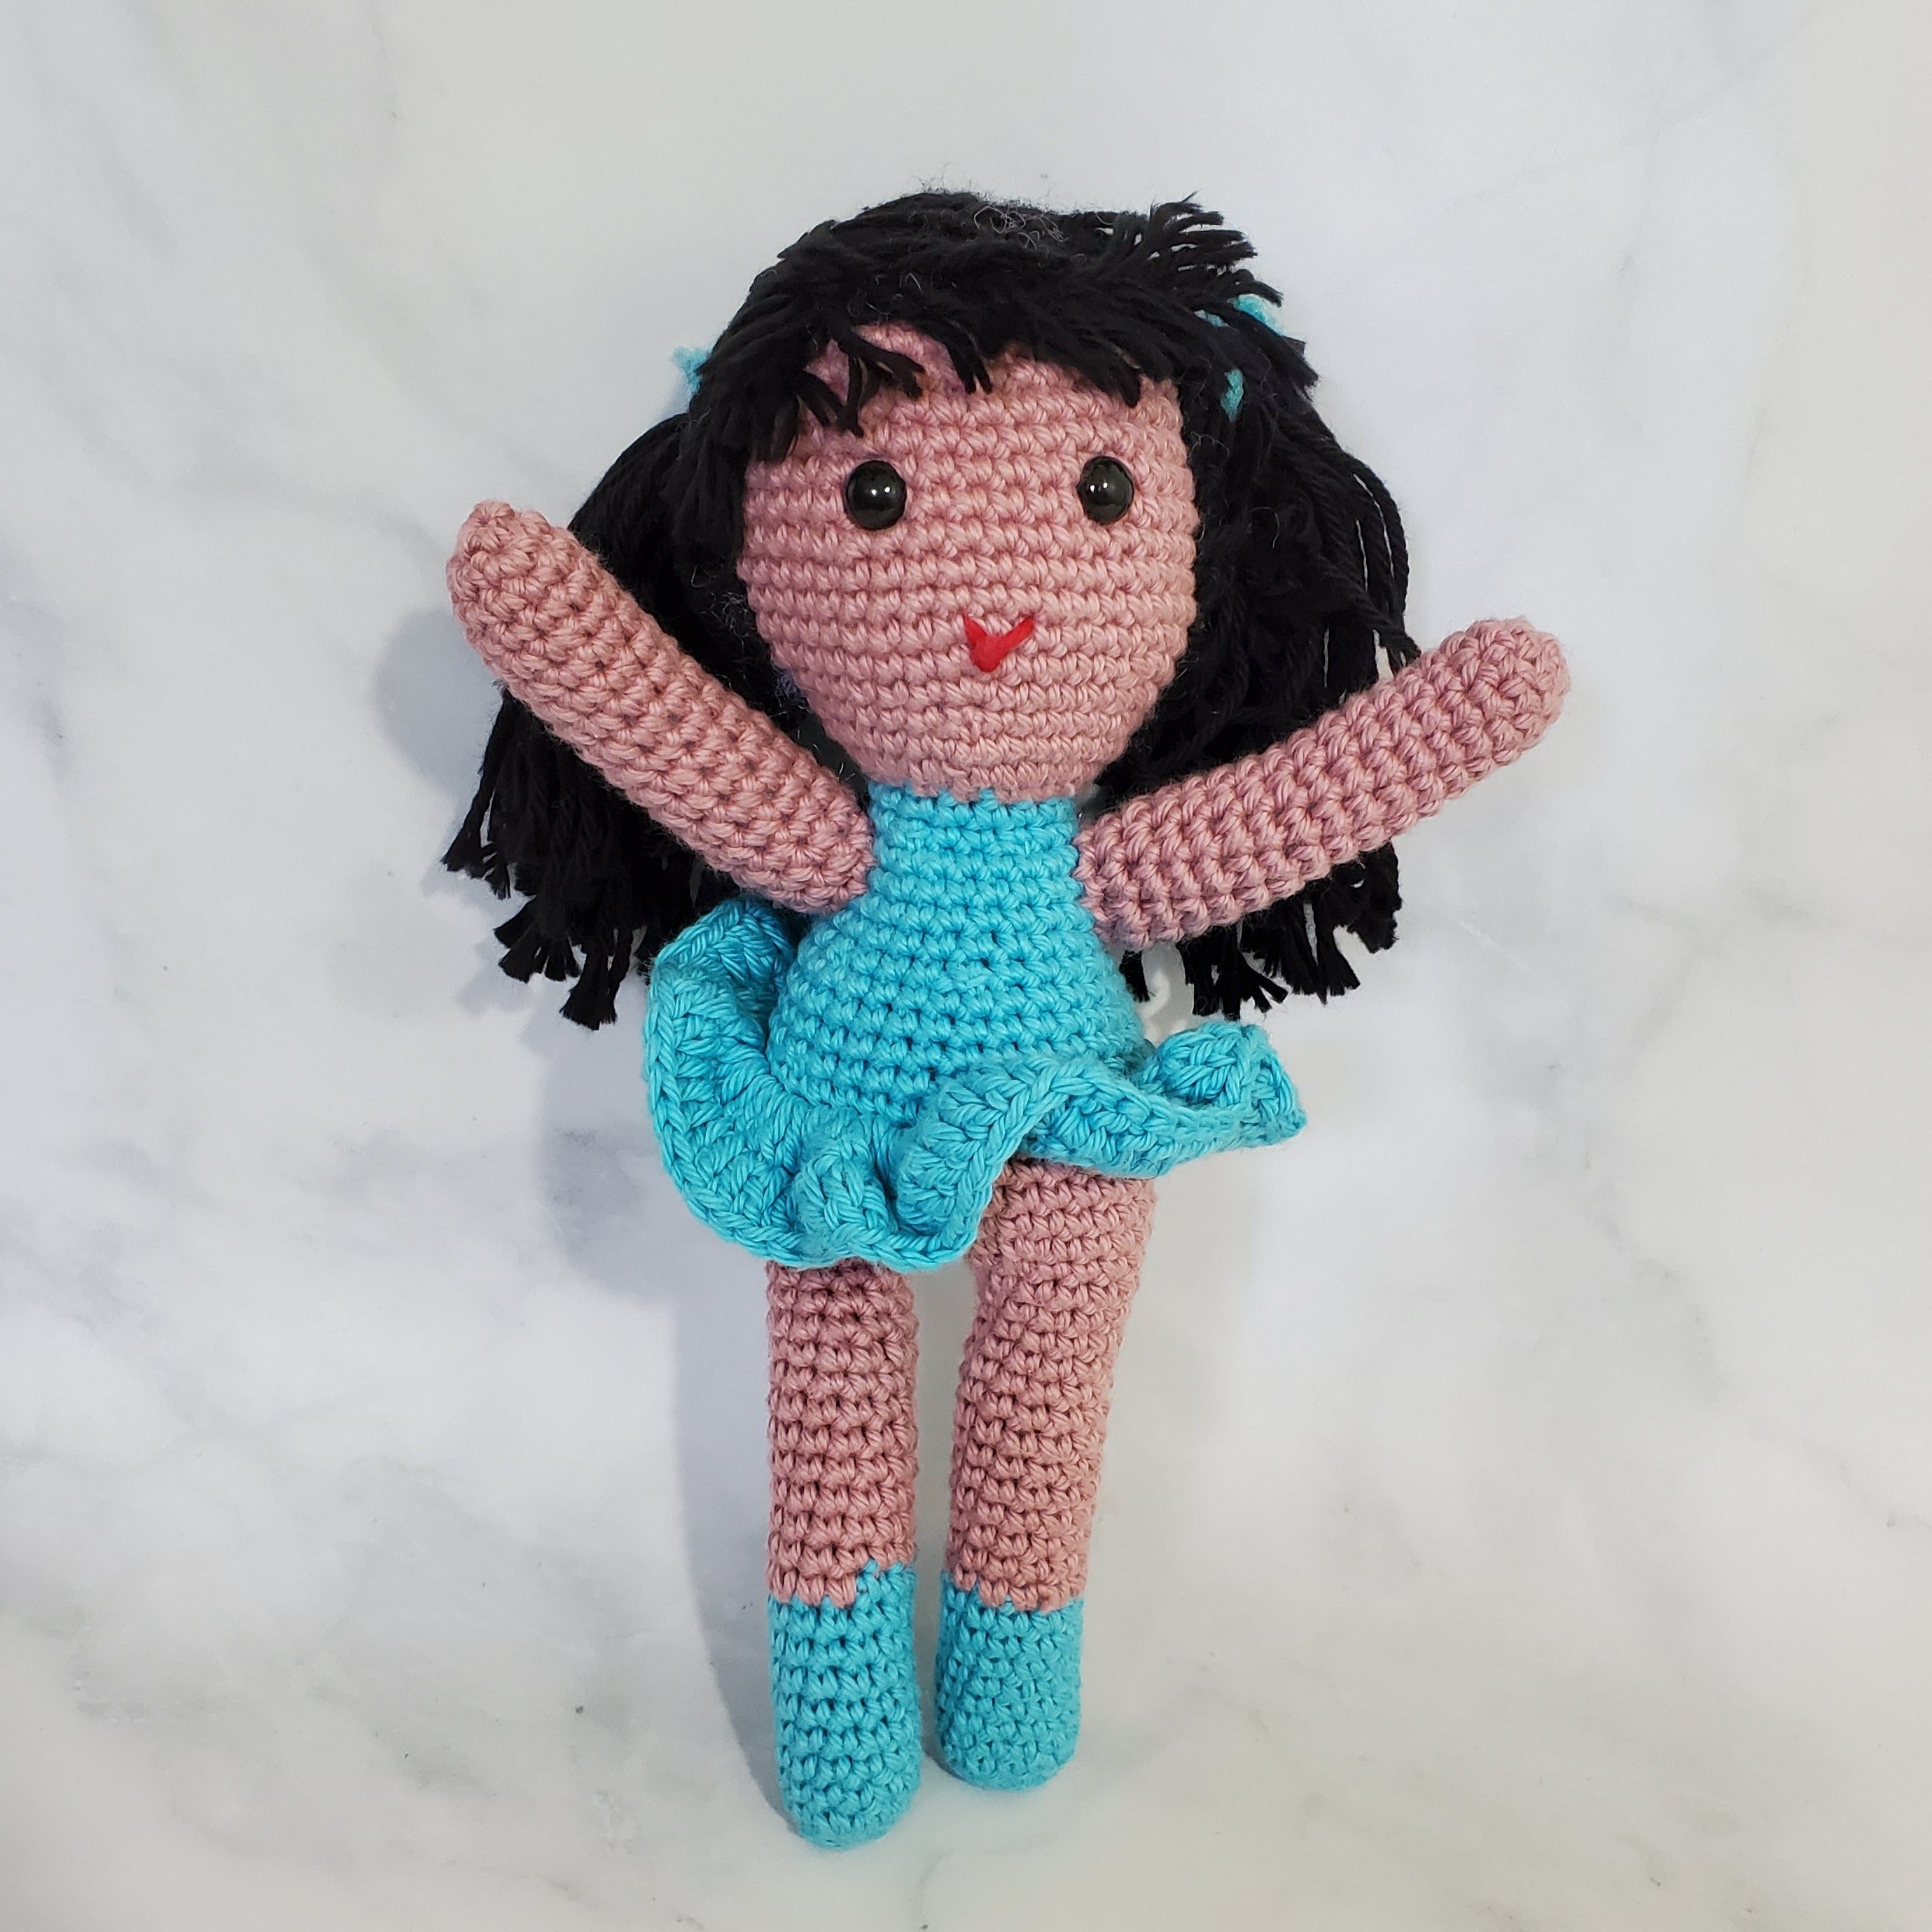 Doll Girl with Long Black Hair - 10 Inches